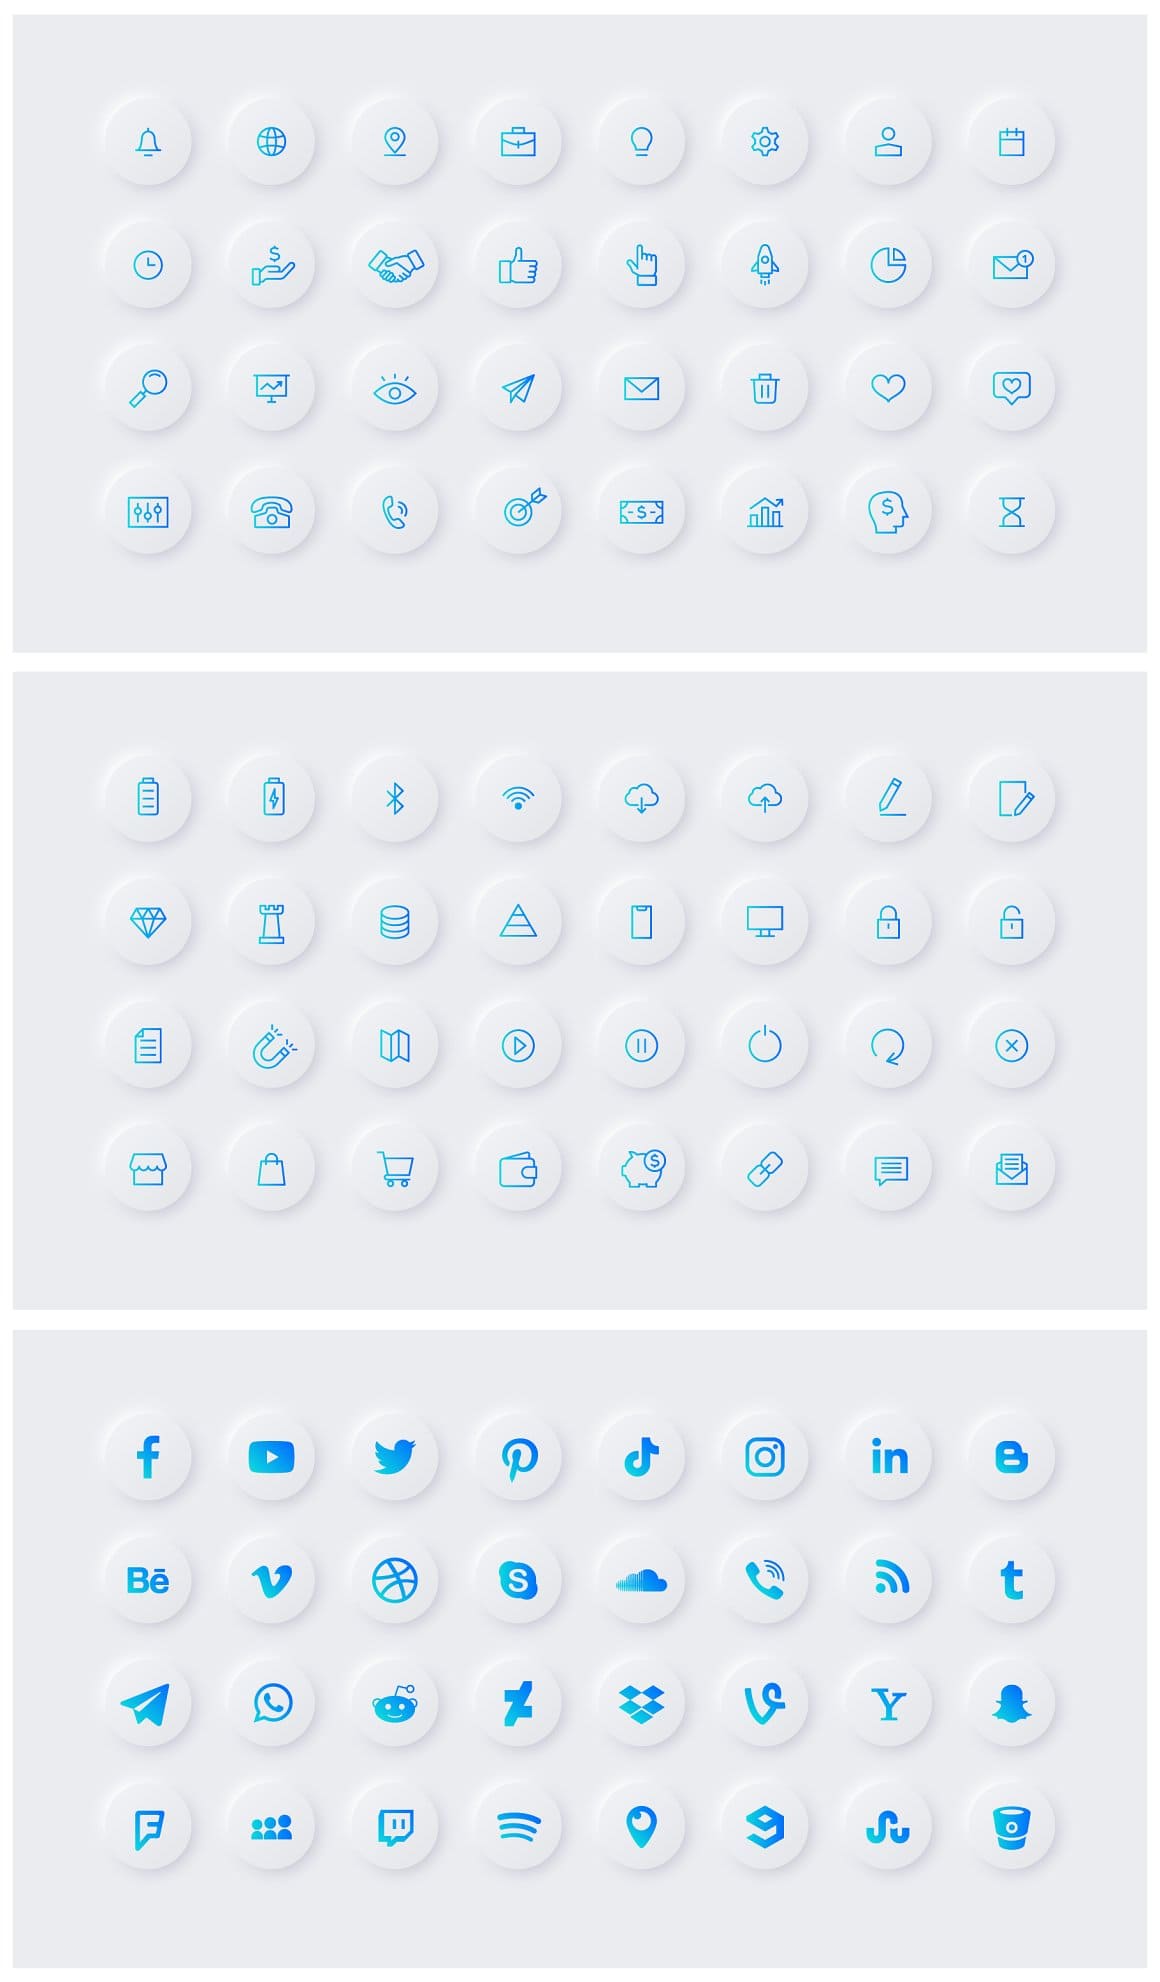 Icons and buttons. Massive Animated PowerPoint Bundle.